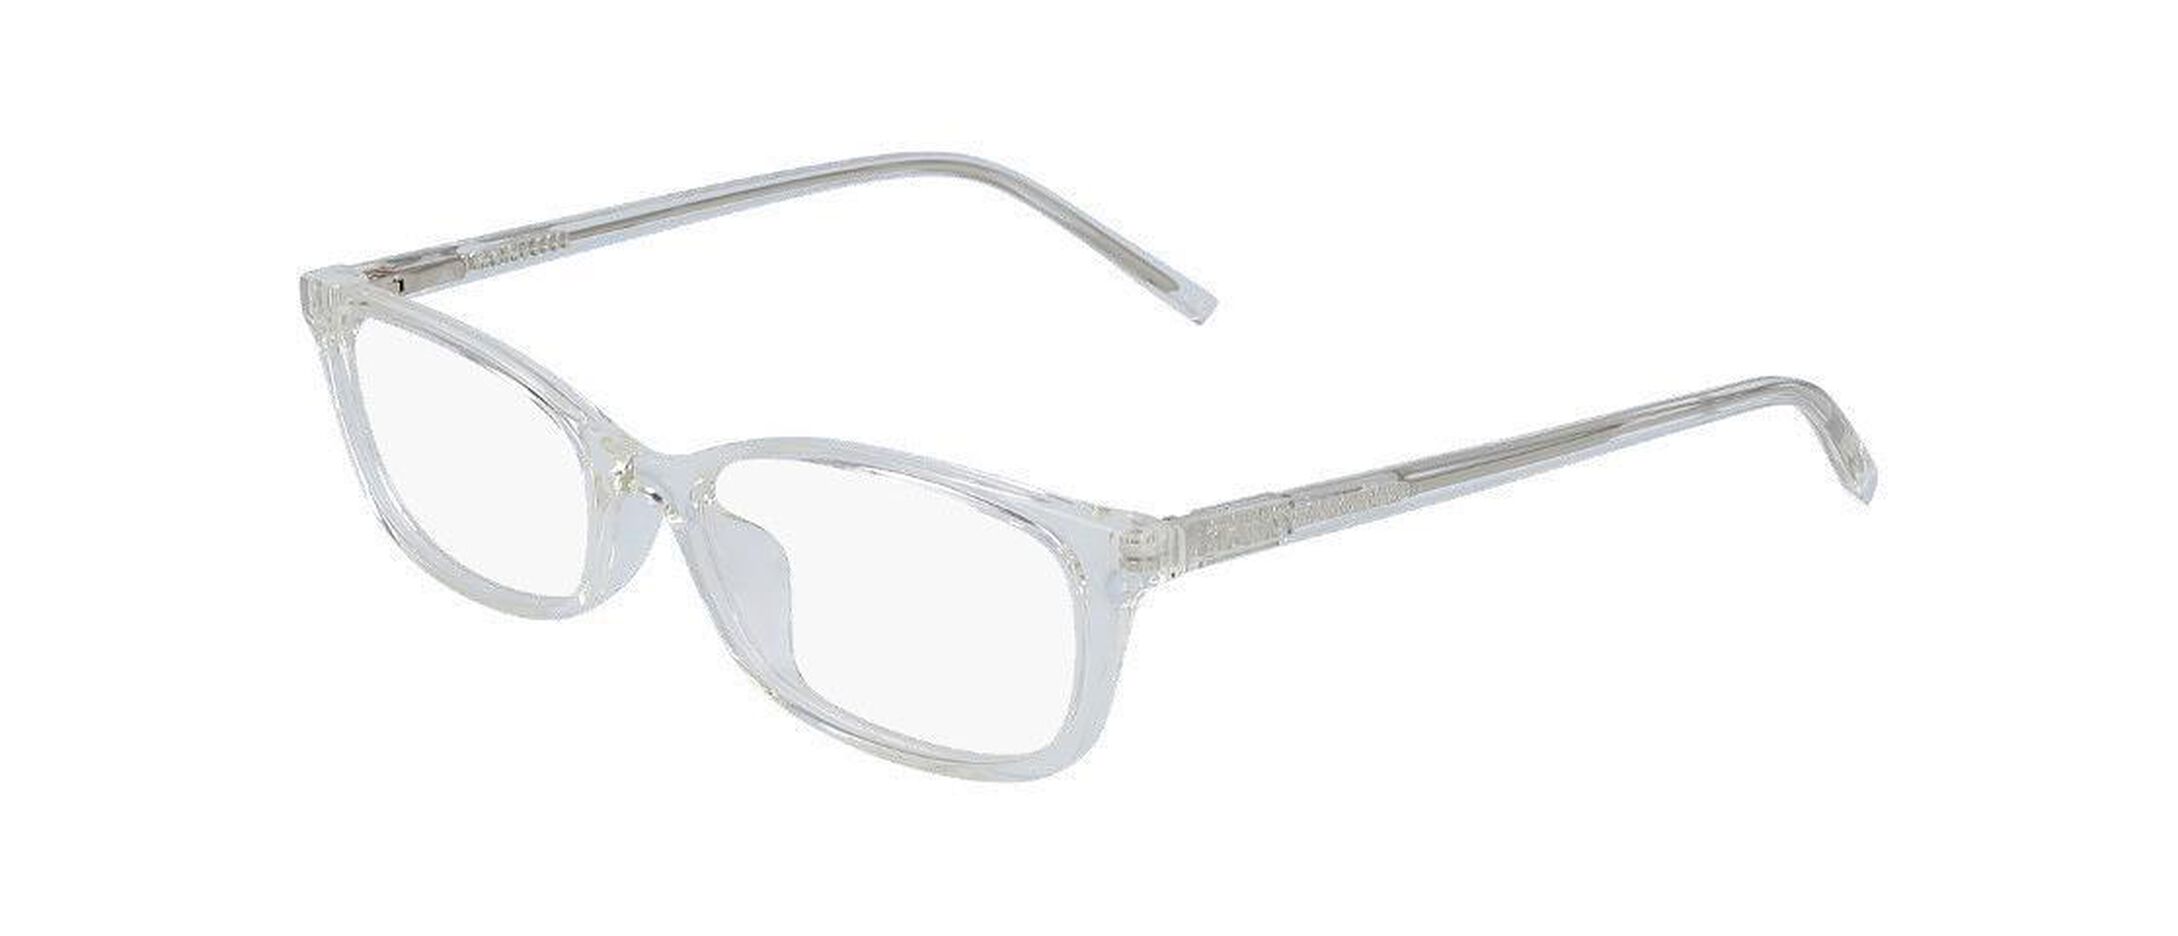 DKNY DK5006 Glasses | Free Shipping and Returns | Eyeconic